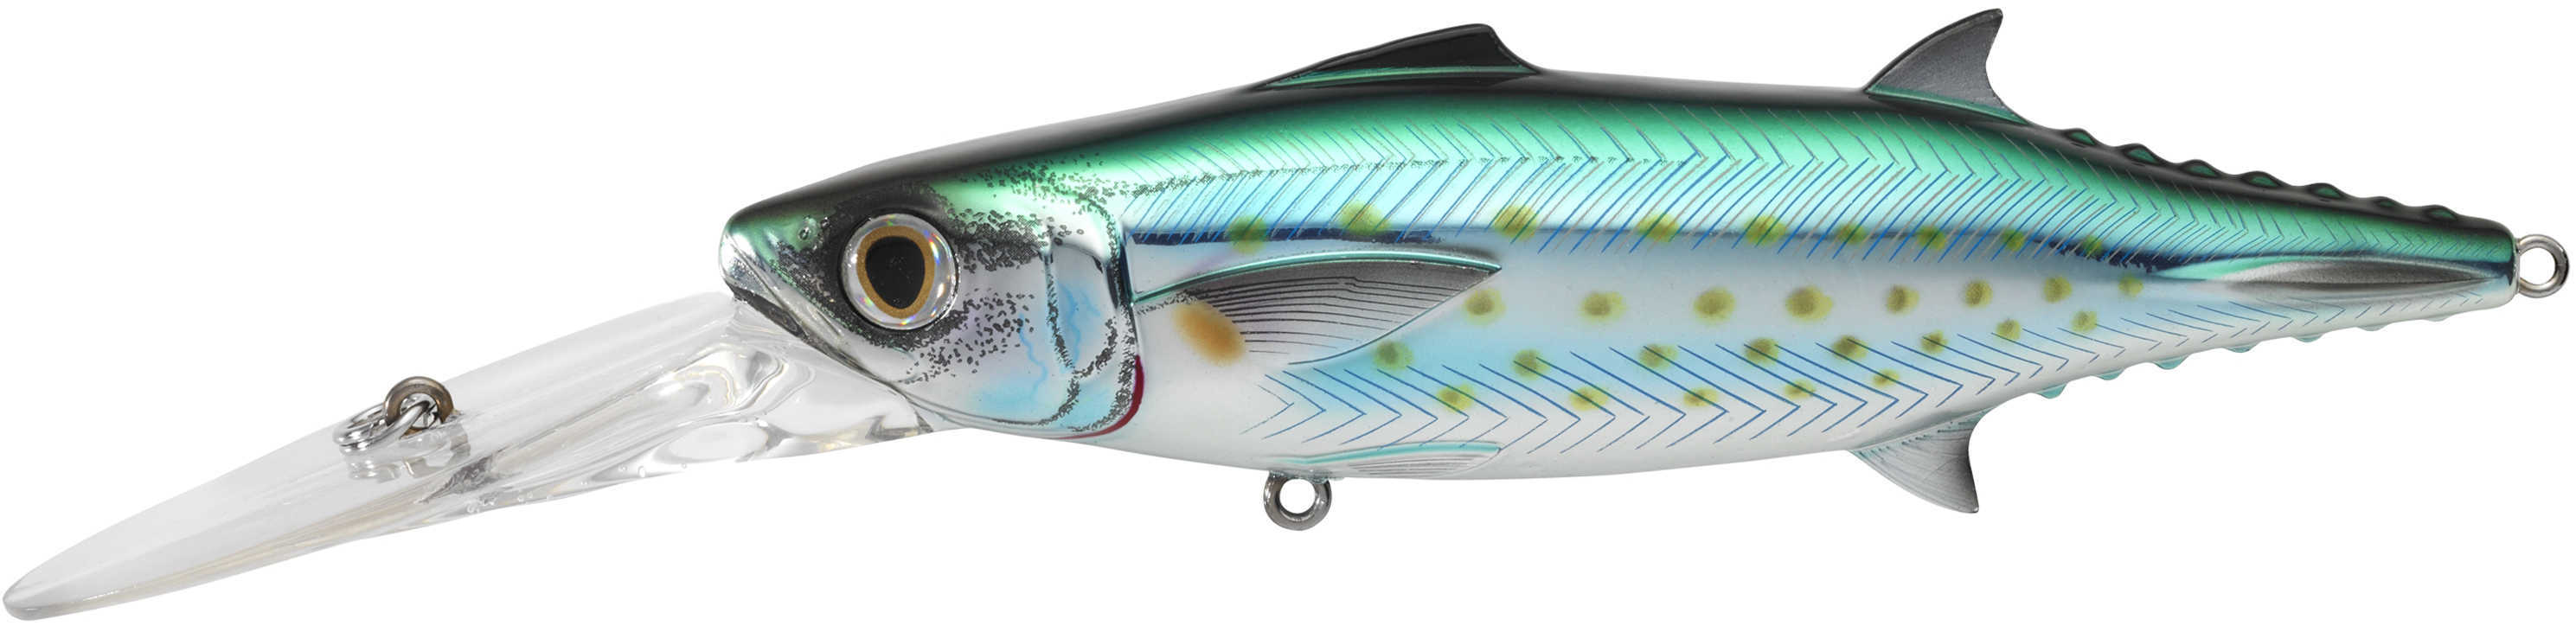 LIVETARGET Lures / Koppers Fishing and Tackle Corp Spanish Mackerel Trolling Bait Silver/Blue/Green 2/0 Md: SMK160D981